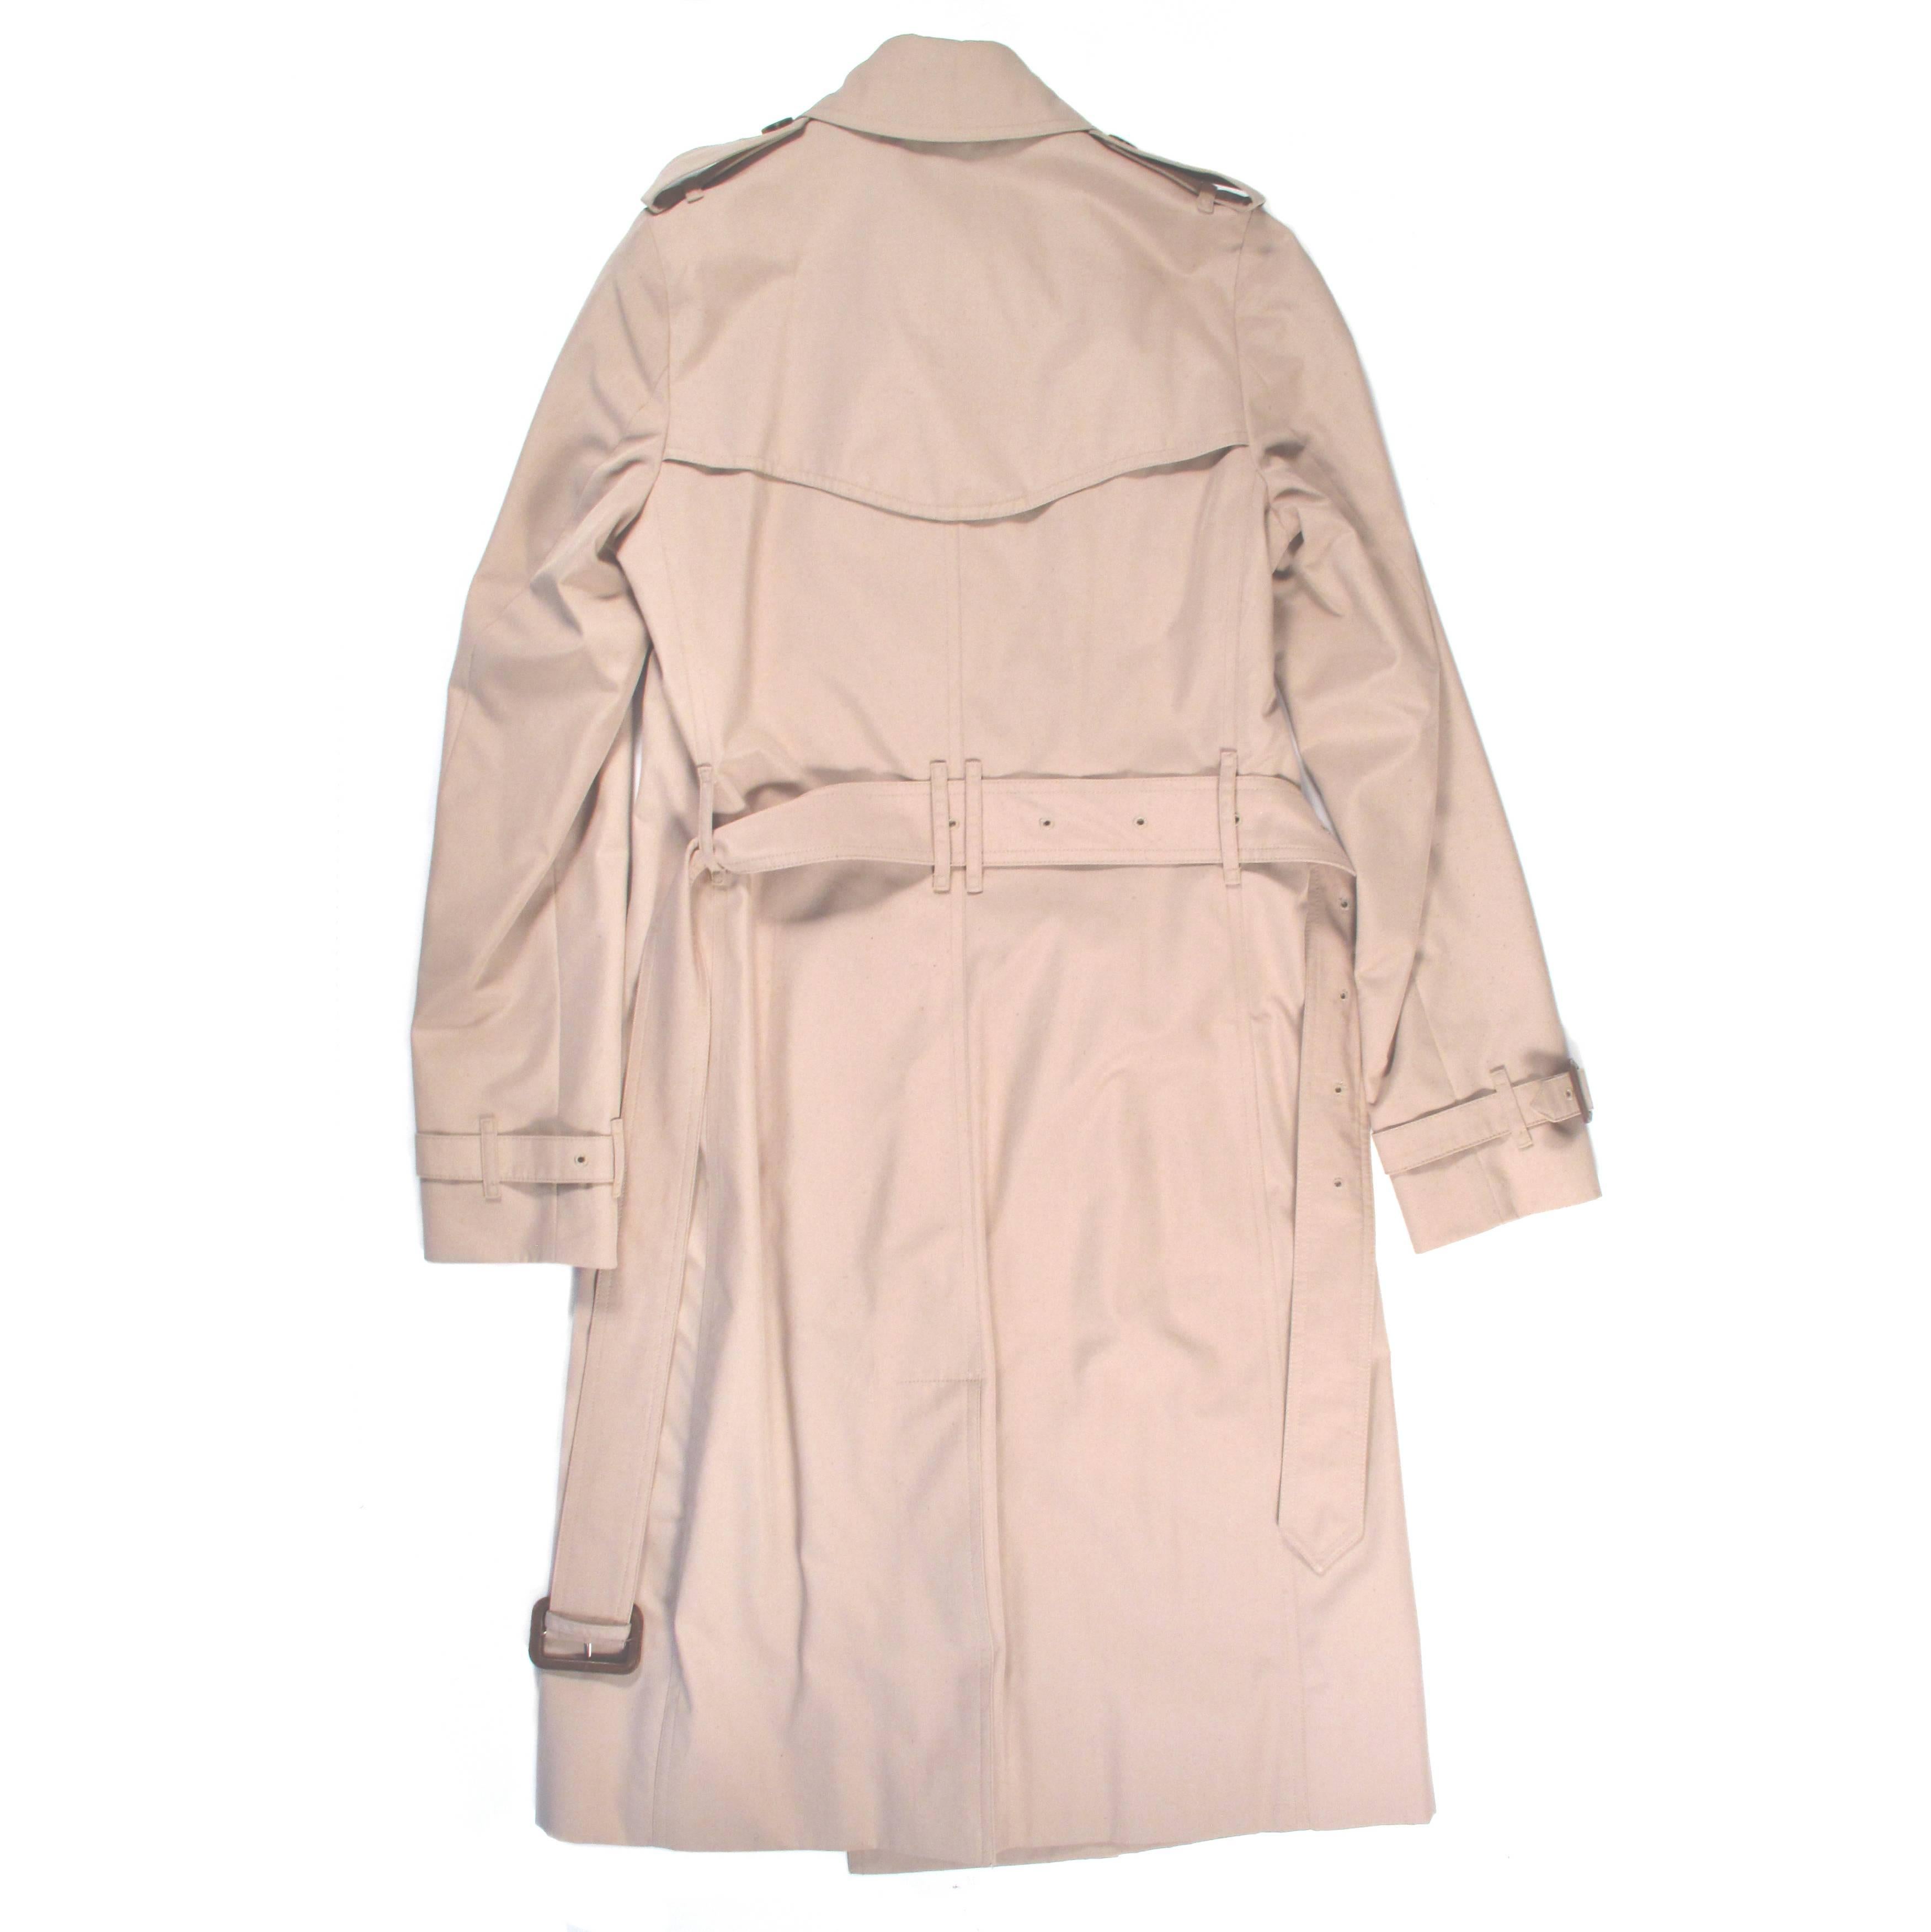 Women's Burberry Trench Coat - 2 / 4 - 34 - 36 - Tan Belted Jacket Cotton London